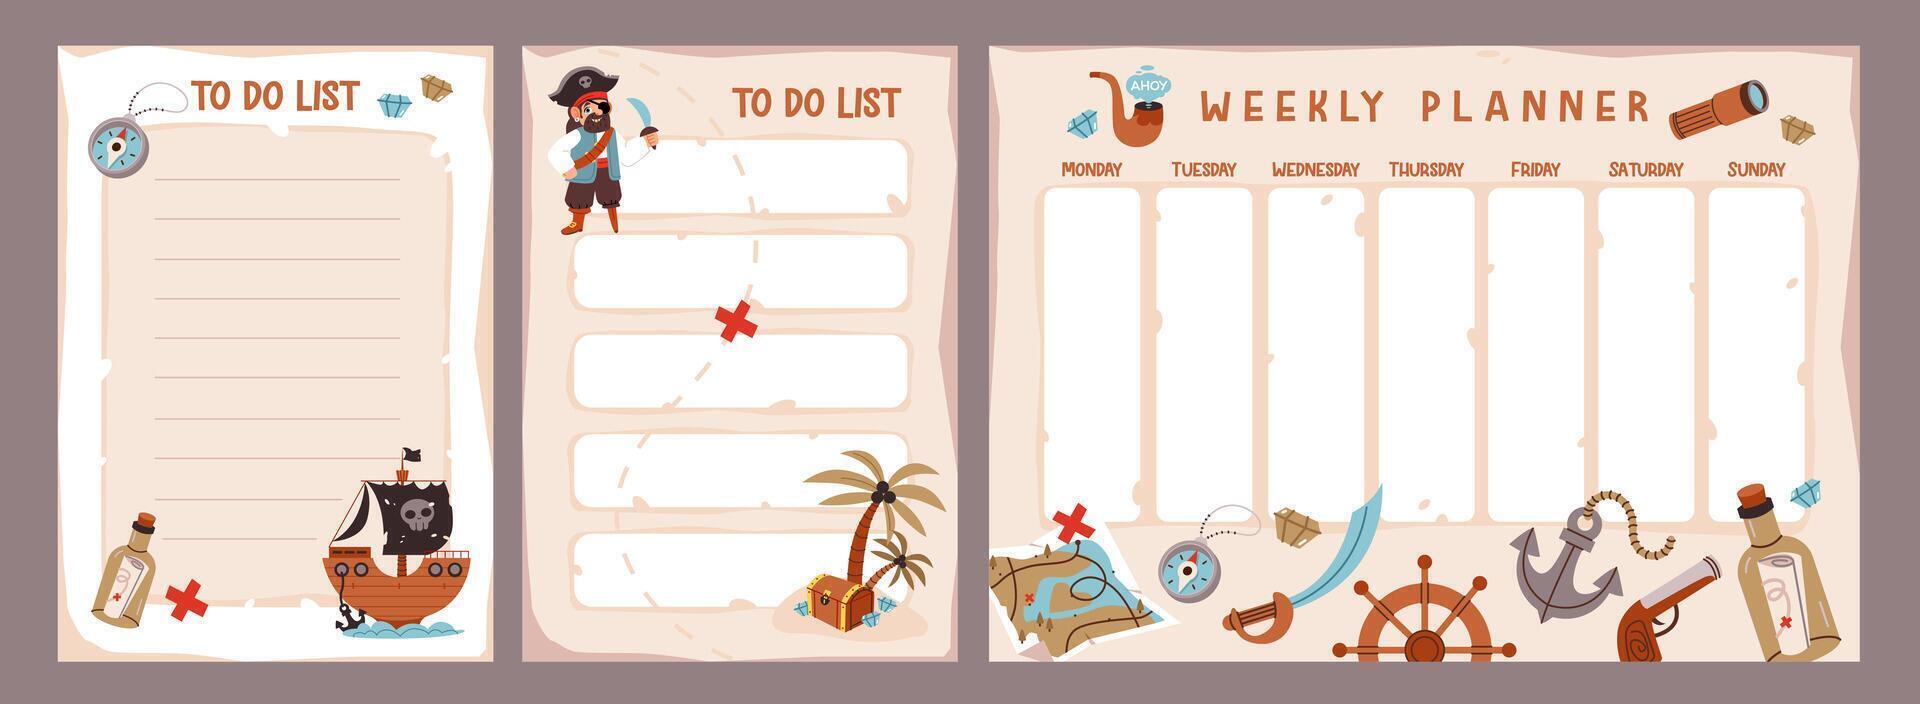 Pirates kids planner. Weekly planner for children with pirate theme elements. To do list with a ship, treasure. Vector template in flat style